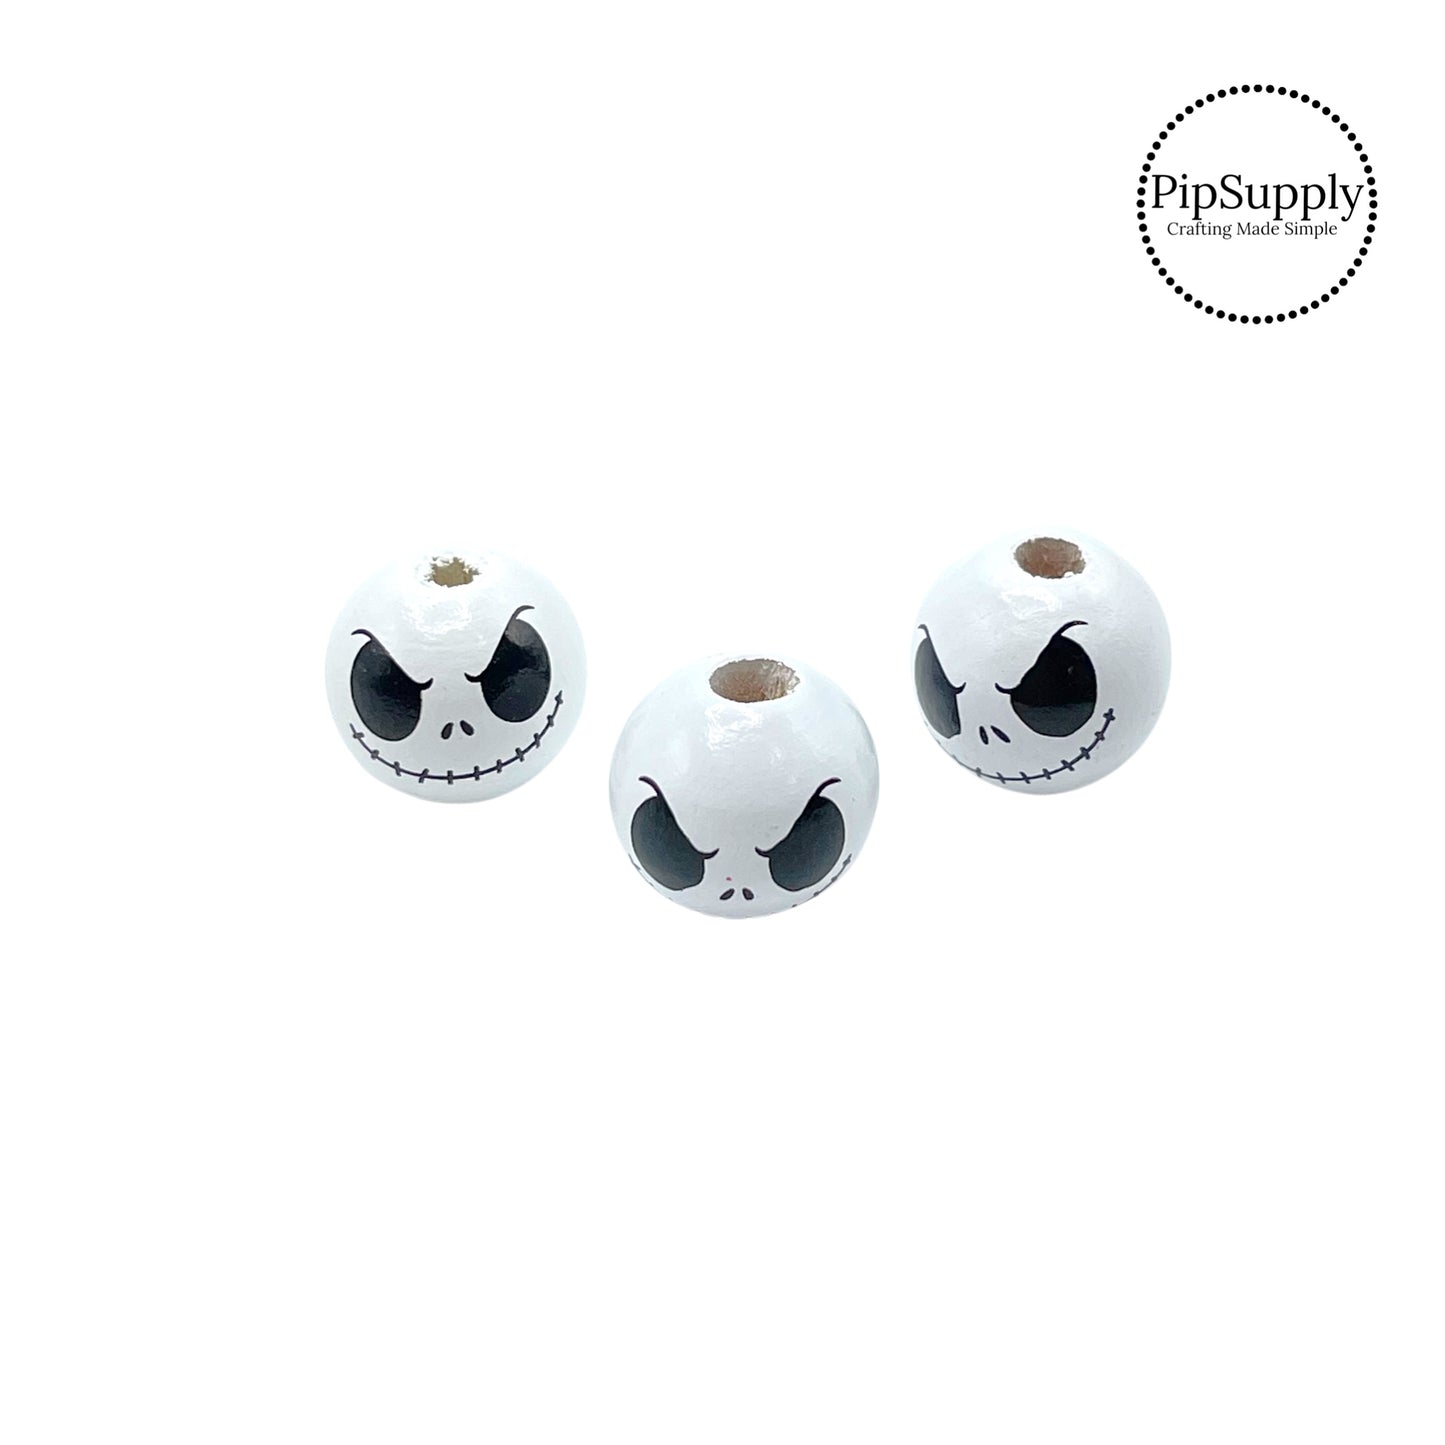 Black eyes and mouth on white wooden beads